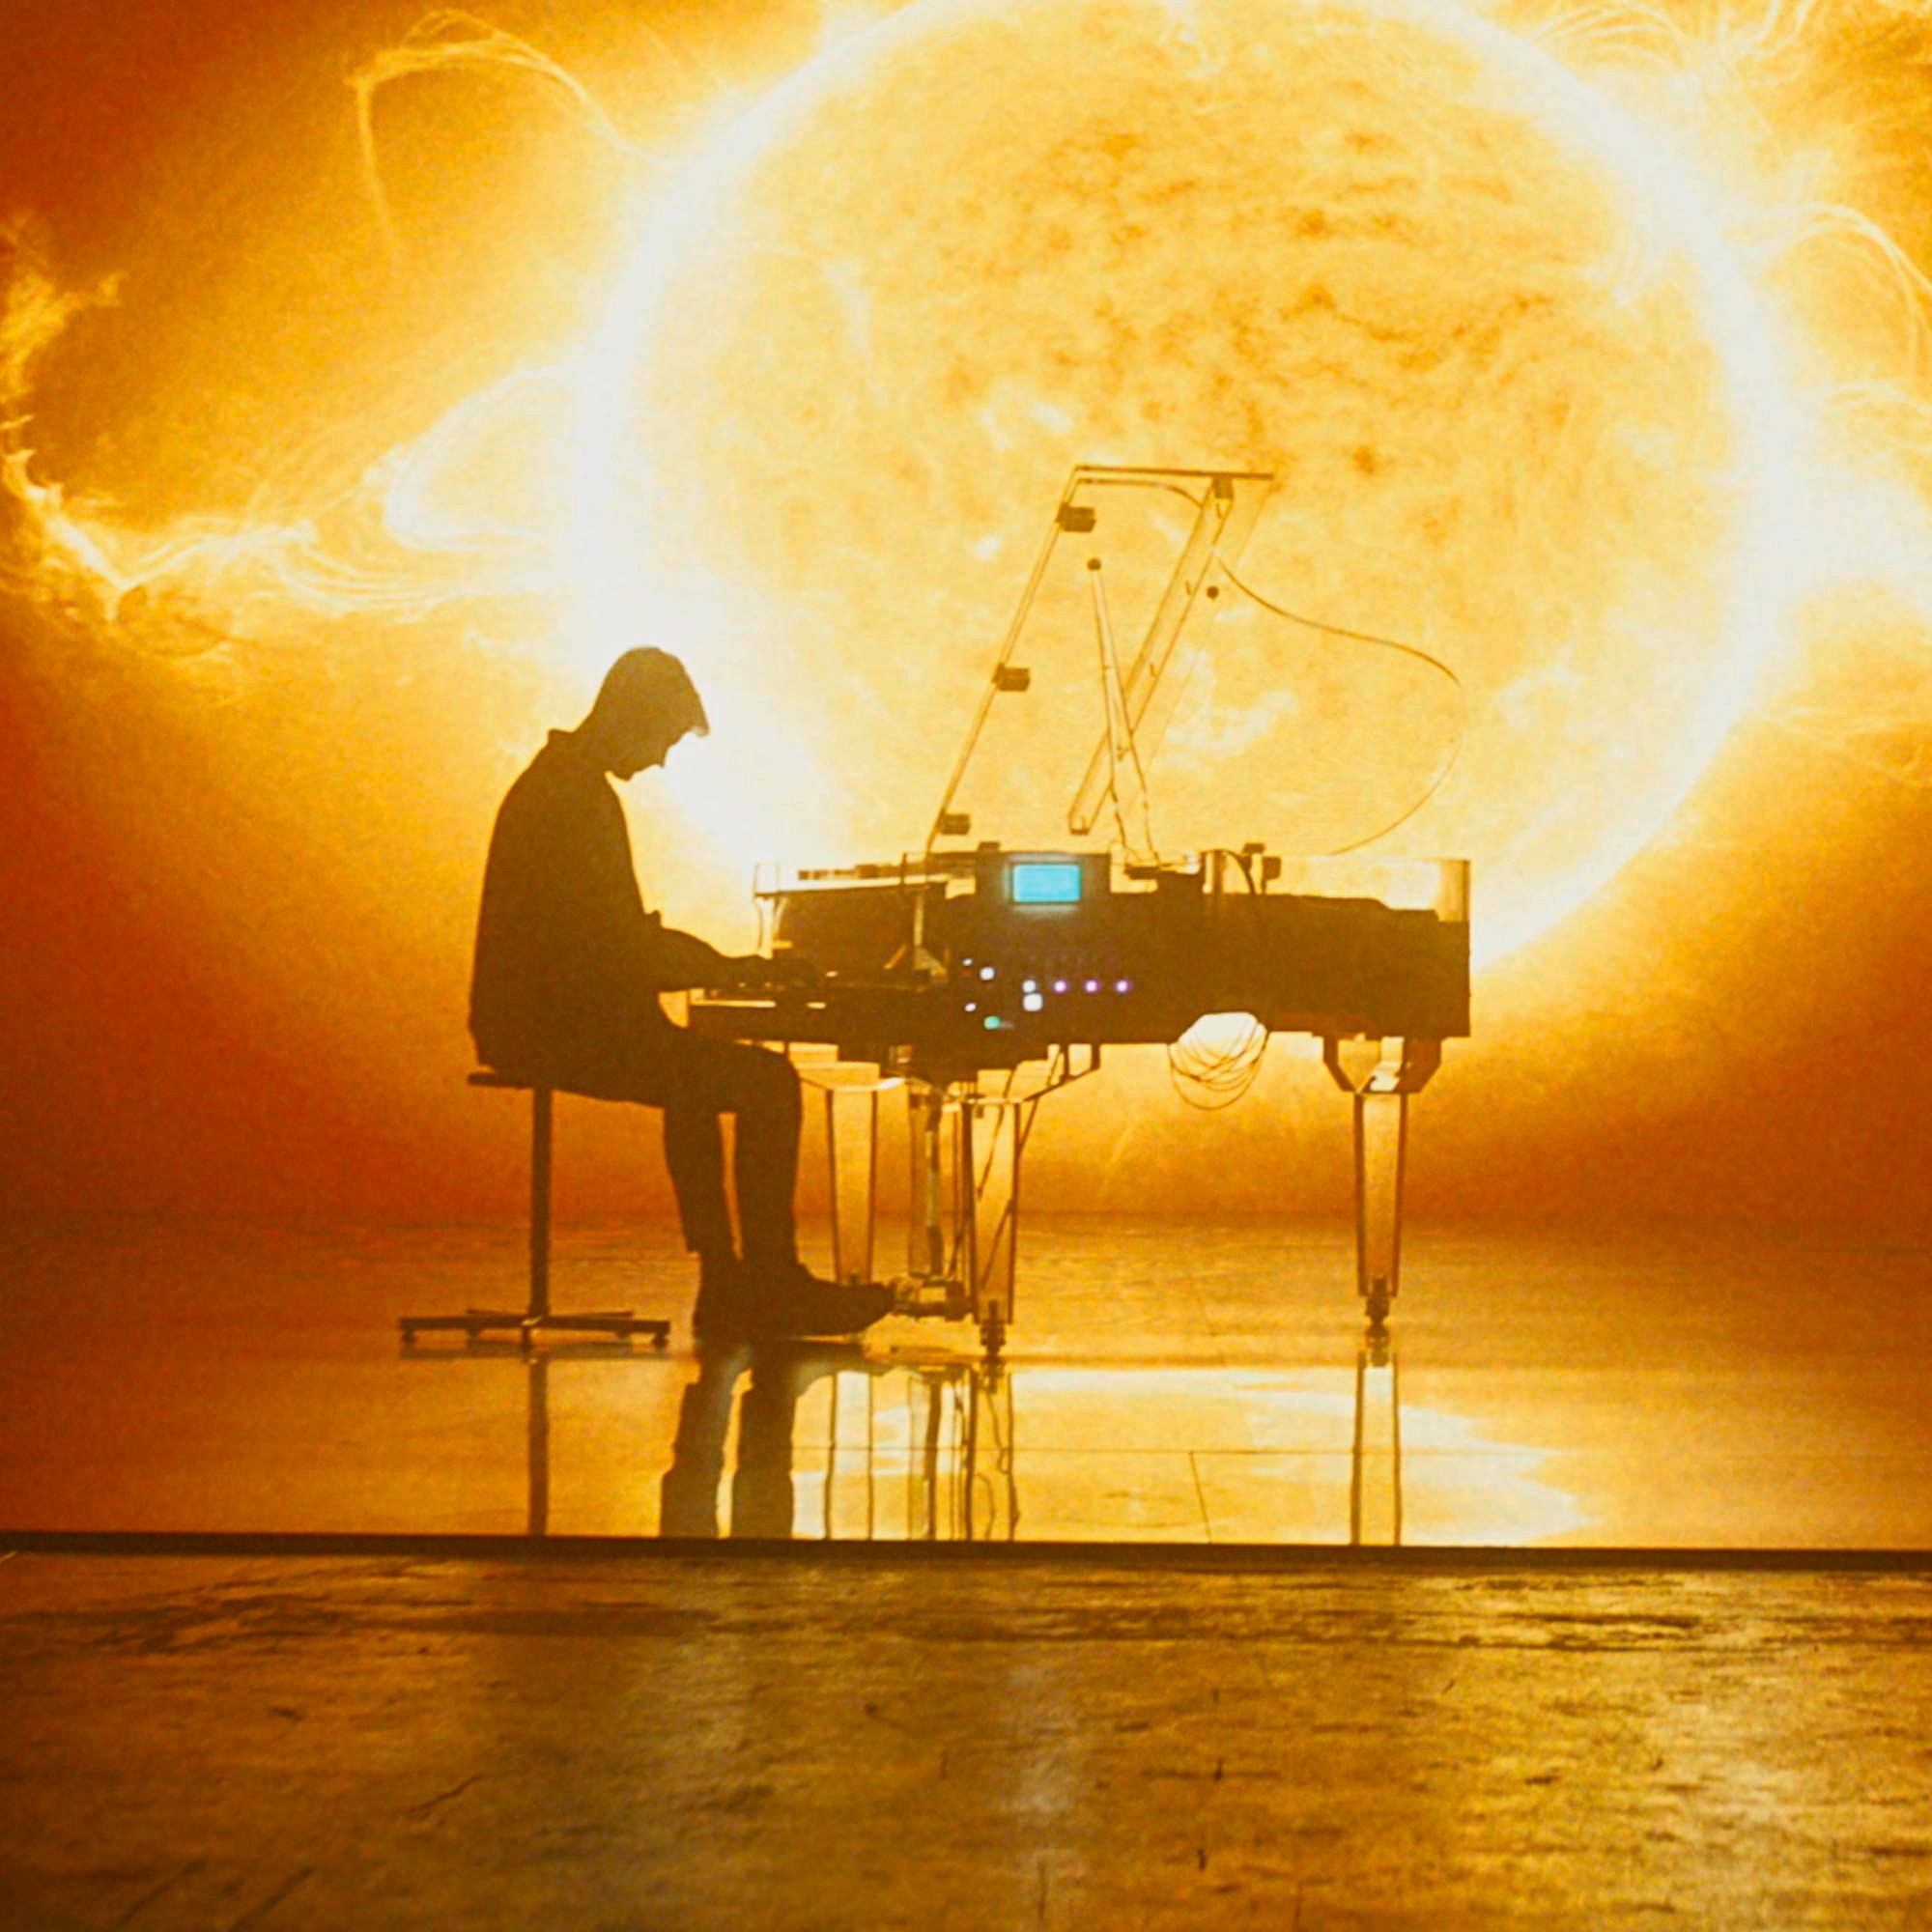 Man playing the piano in front of giant sun explosion video